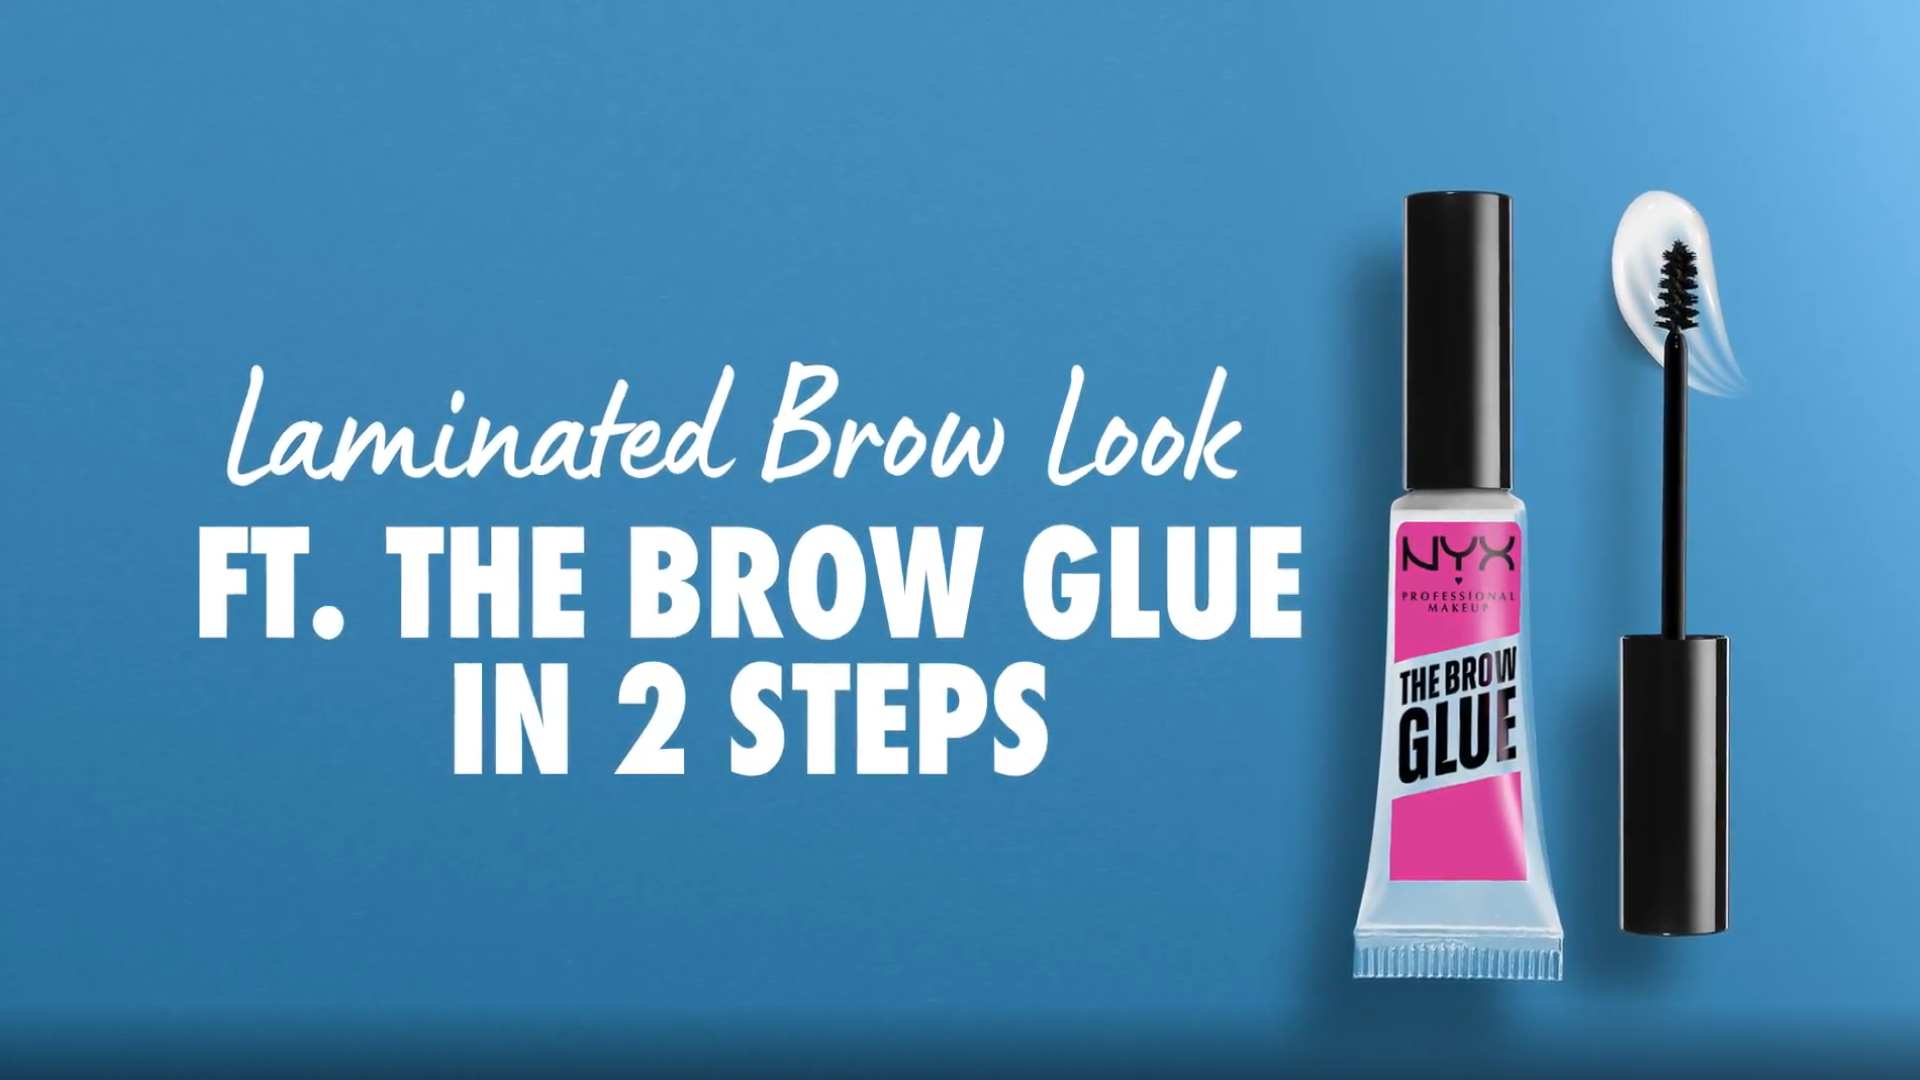 Eyebrow Brow Hold Clear NYX Makeup Glue, Professional Gel, Extreme